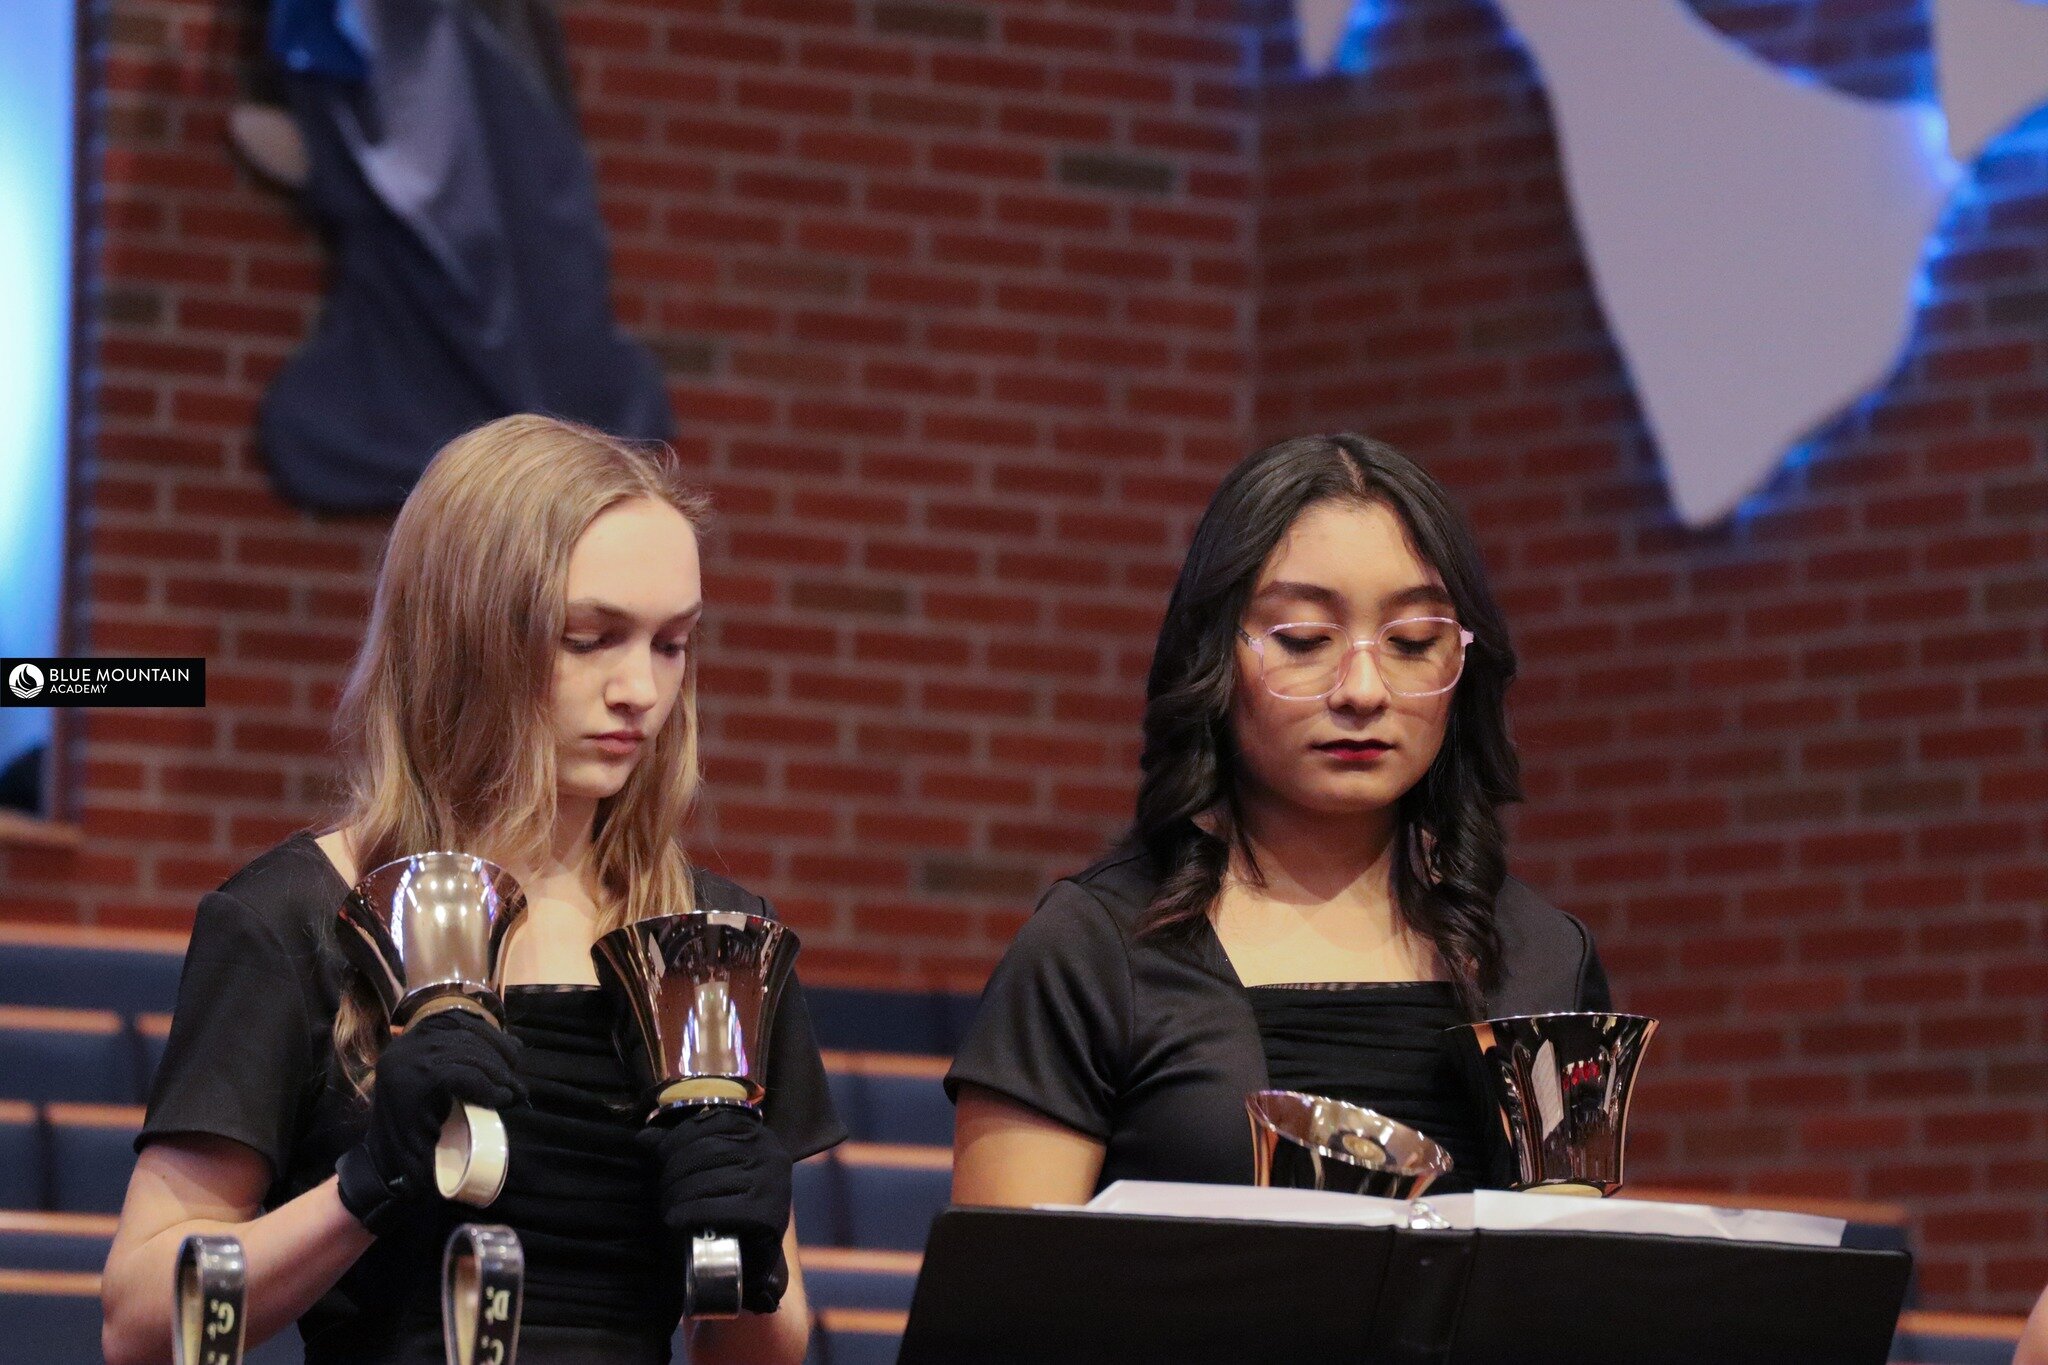 🎶 A heartfelt thanks to La Sonnette Ensemble for gracing our church with a stunning performance that elevated our morning program! 🙌✨ Special kudos to Jordyn Schaeffer who also took the lead and directed a beautiful song &ndash; a true testament to